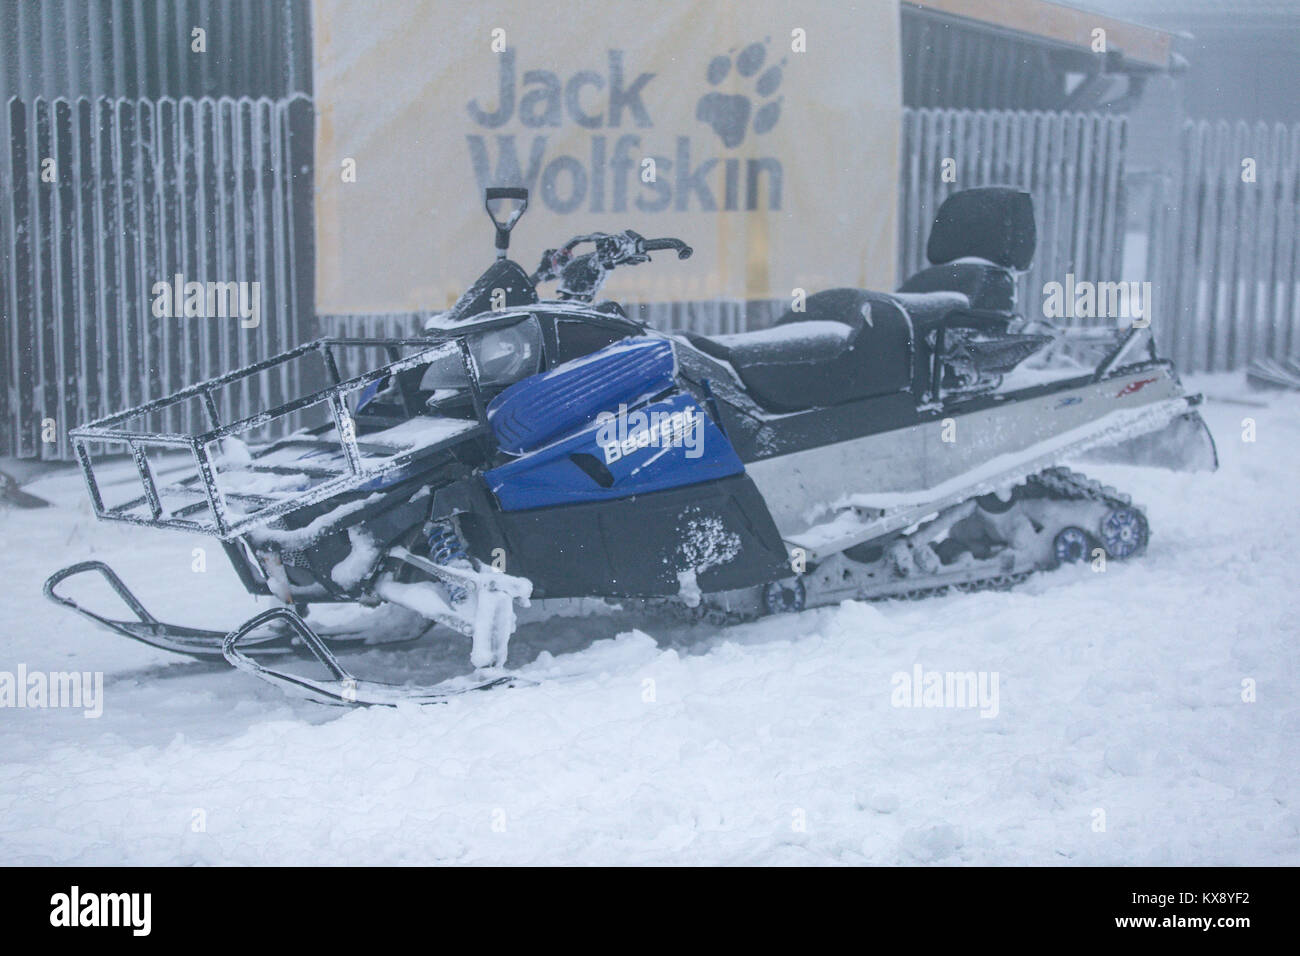 A snowmobile for hire allowing to travel in difficult winter conditions on snow and ice. Photo taken on a Skrzyczne mountain after overnight snowfall. Stock Photo